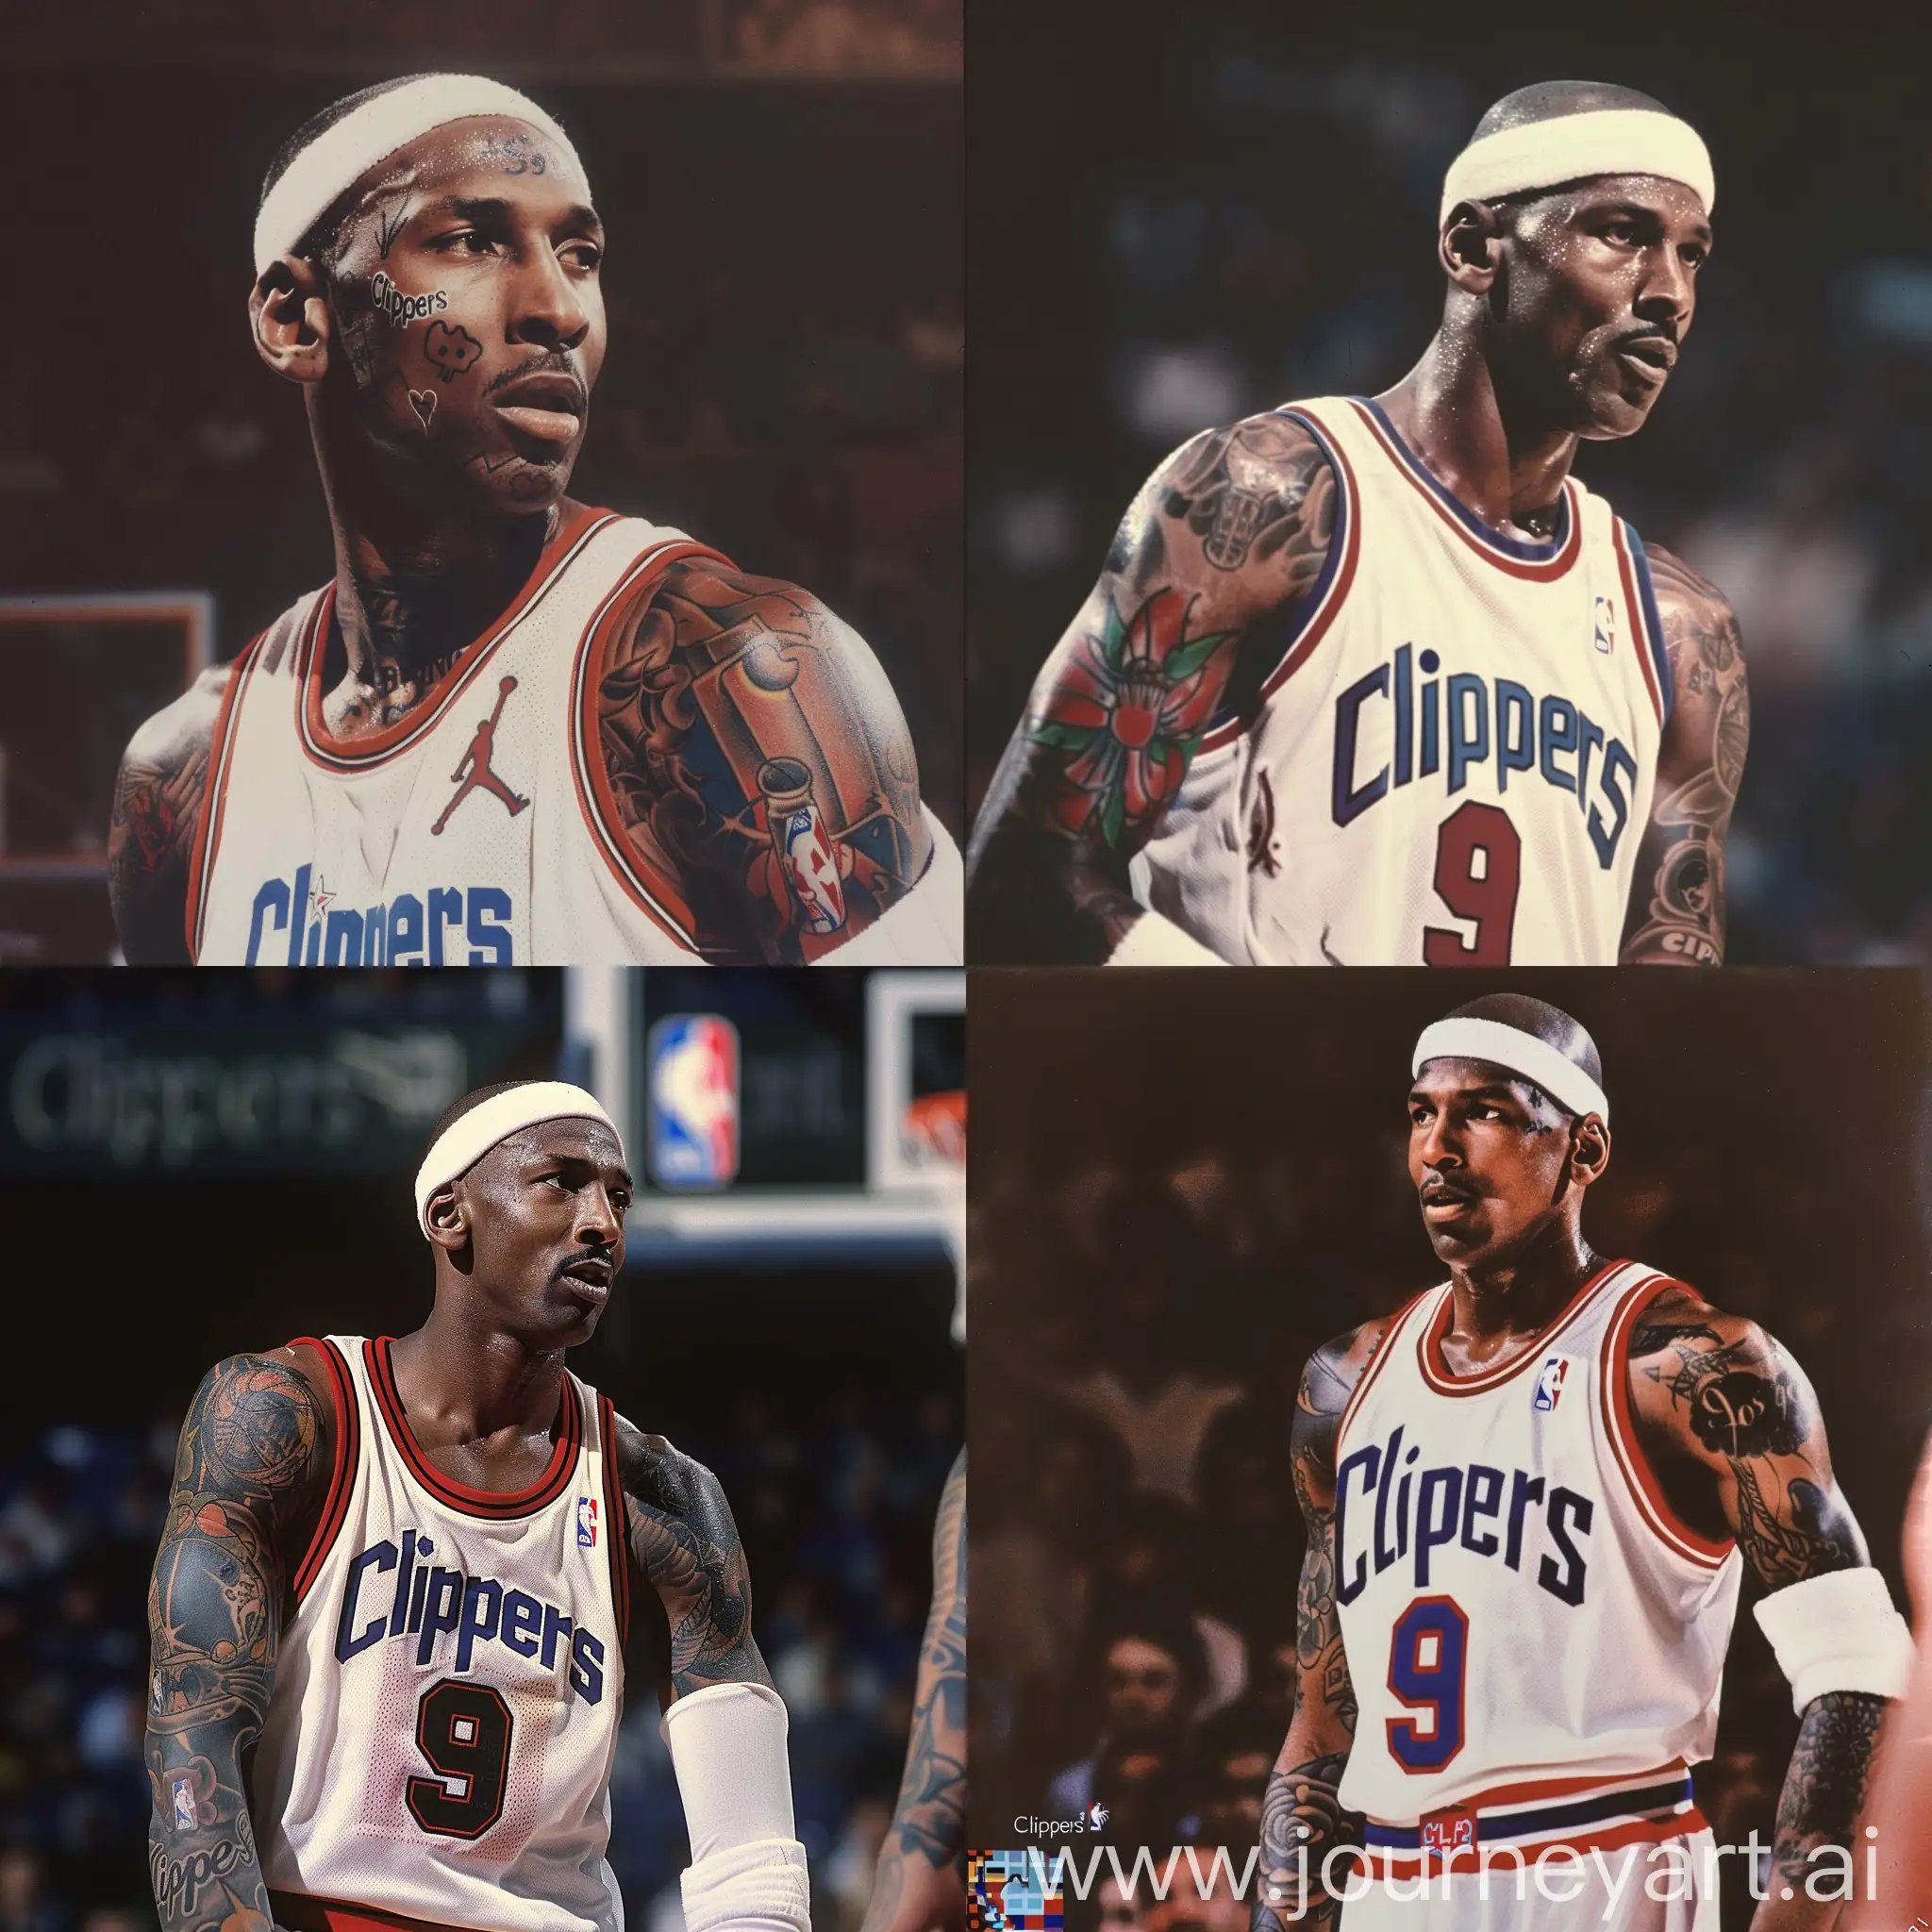 1980s-Michael-Jordan-PostGame-Interview-with-Tattoos-Clippers-Jersey-and-Headband